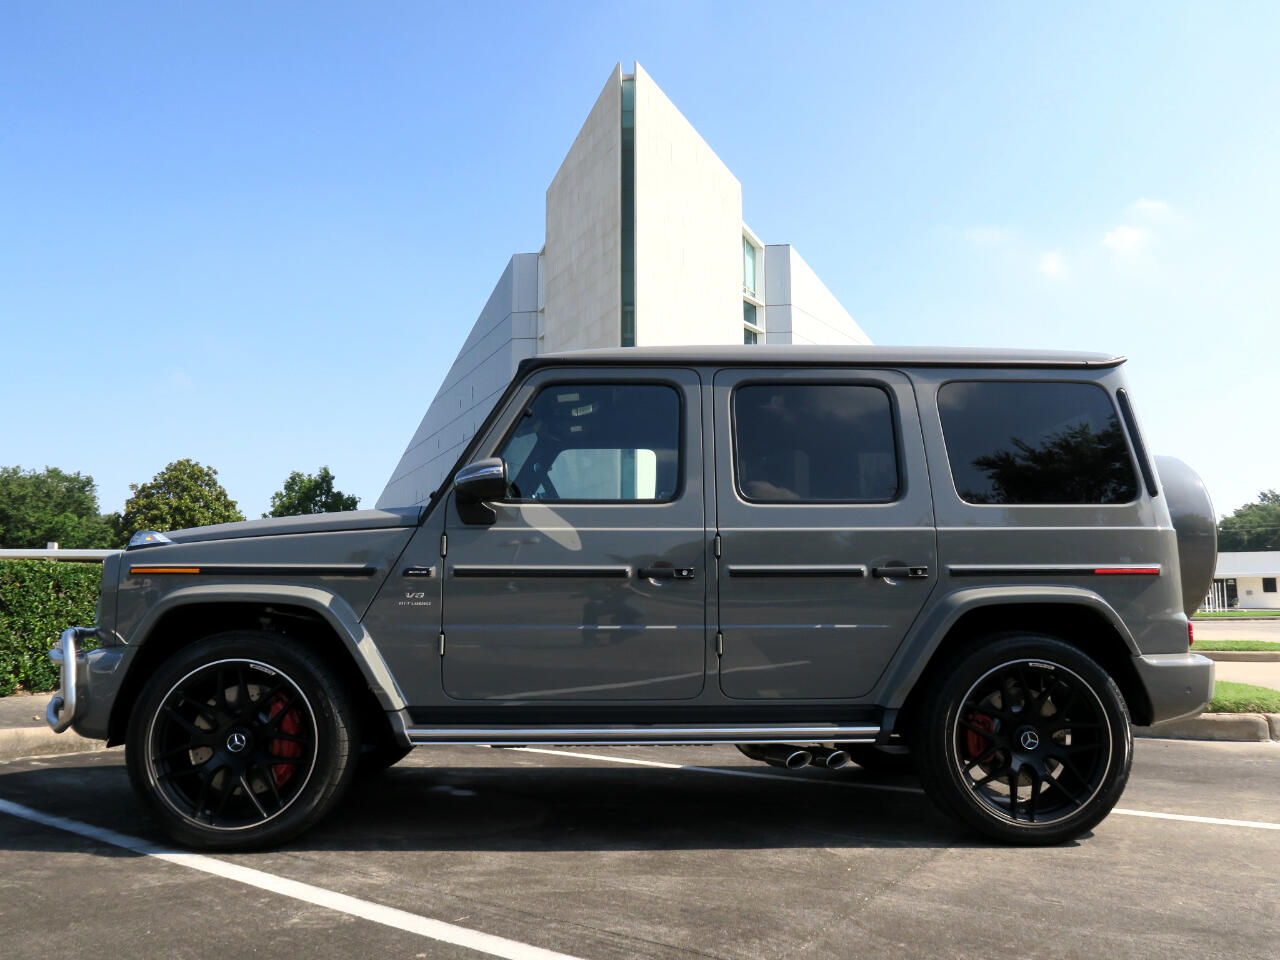 Used 21 Mercedes Benz G Class Amg G 63 4matic Suv For Sale In Houston Tx Team Autoplex